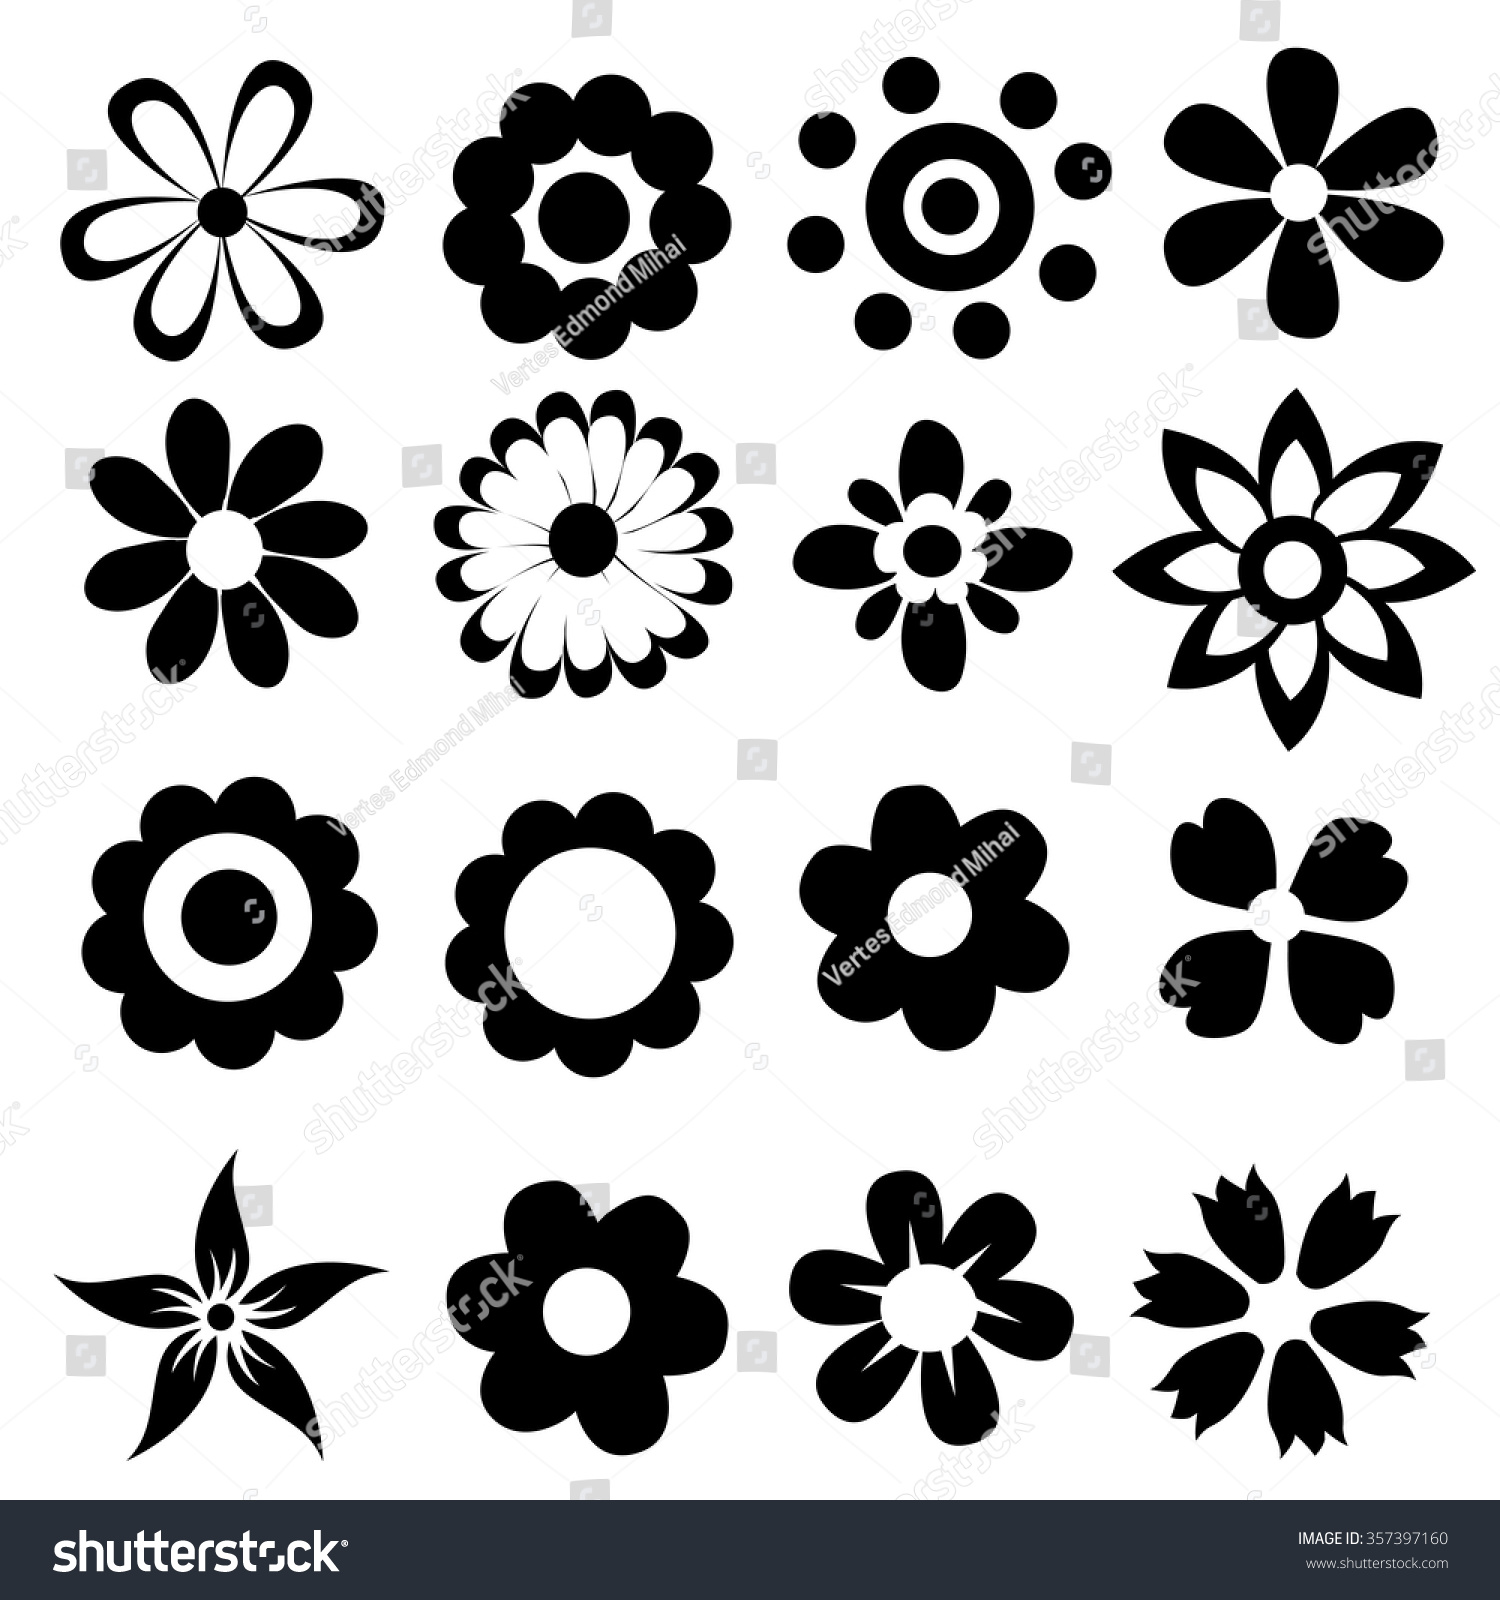 Silhouettes Simple Vector Flowers Stock Vector (Royalty Free) 357397160 ...